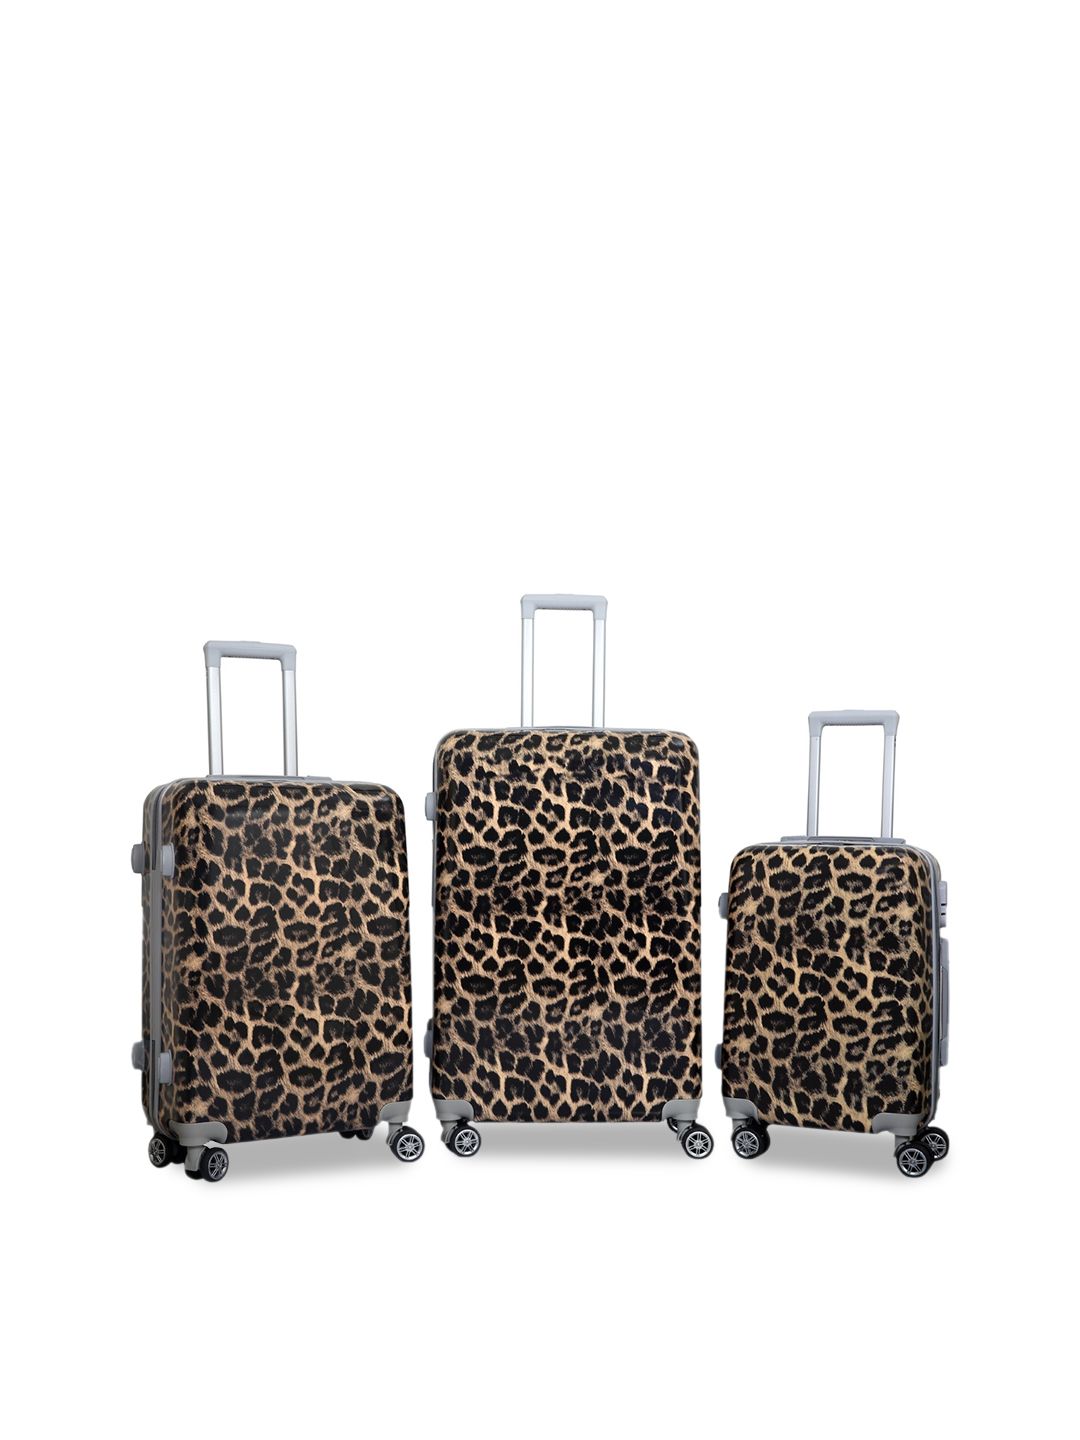 Polo Class Set of 3 Black & Beige Animal Printed Hard Sided Cabin Trolley Suitcase Price in India